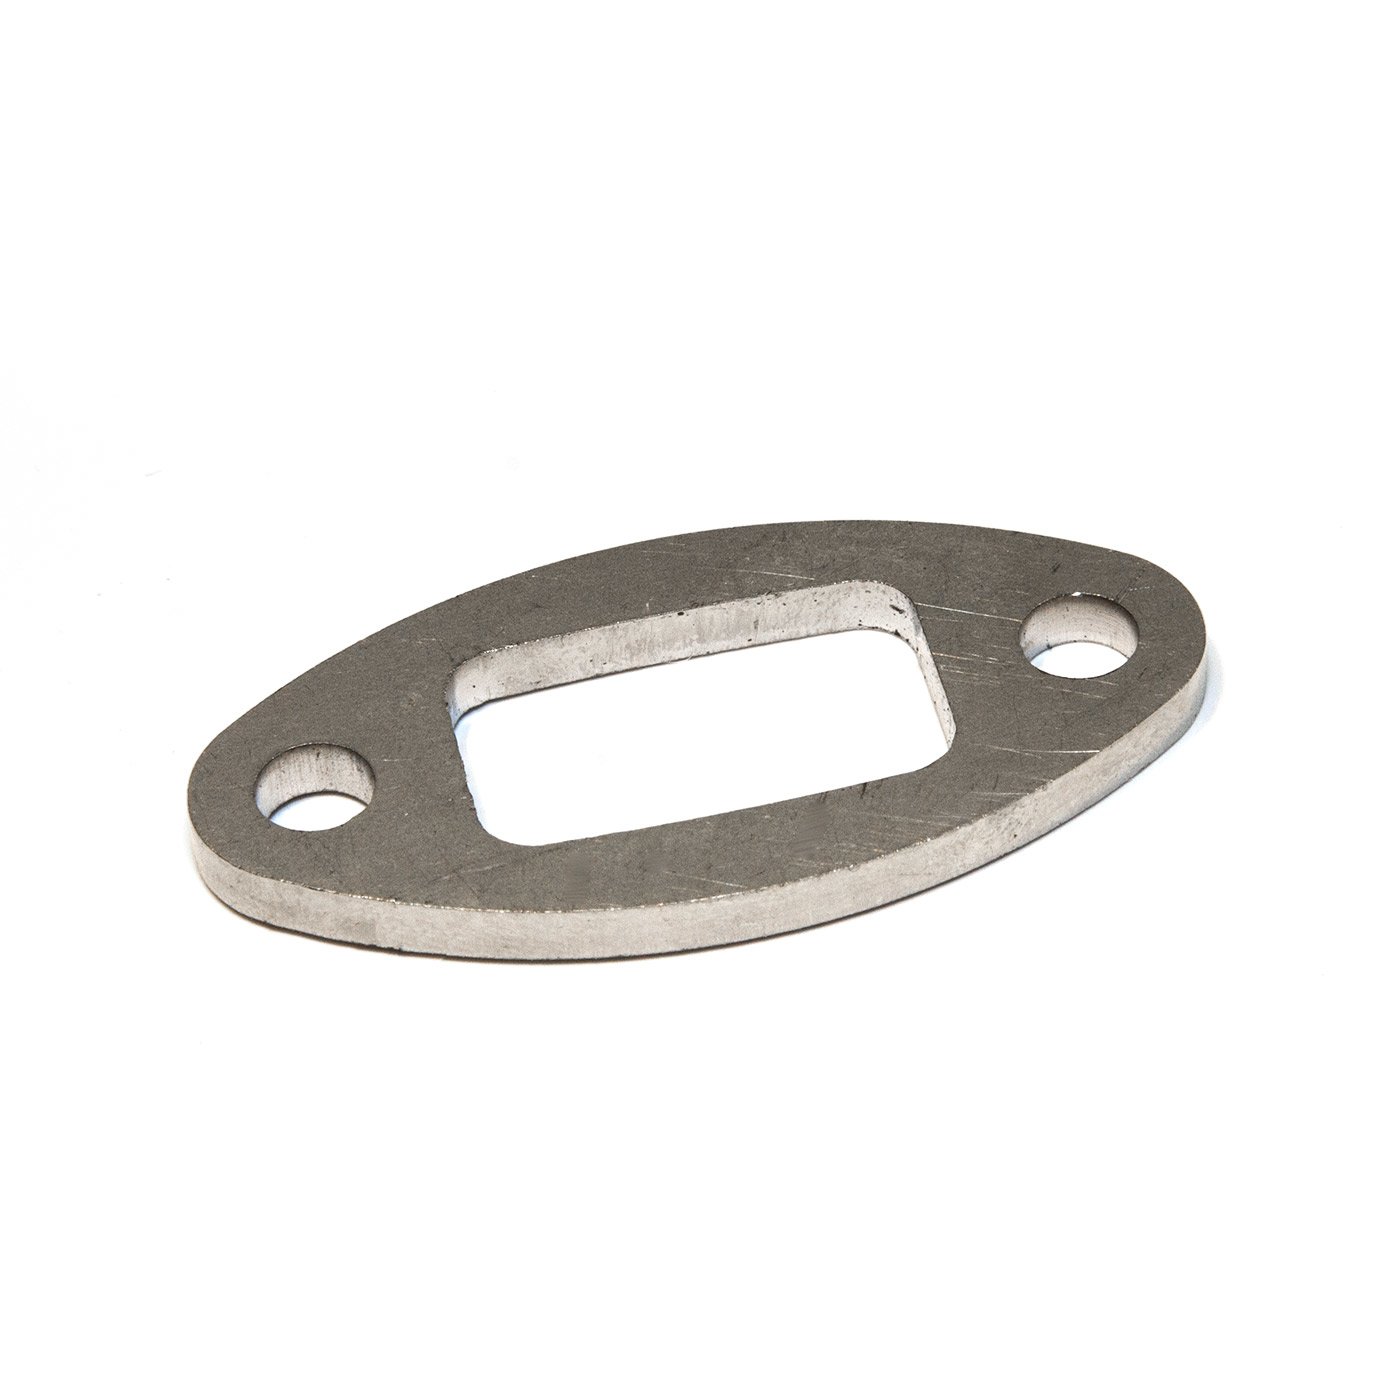 Stainess steel exhaust flange for ZG20 / ZG22 / ZG23/ ZG26 / G23